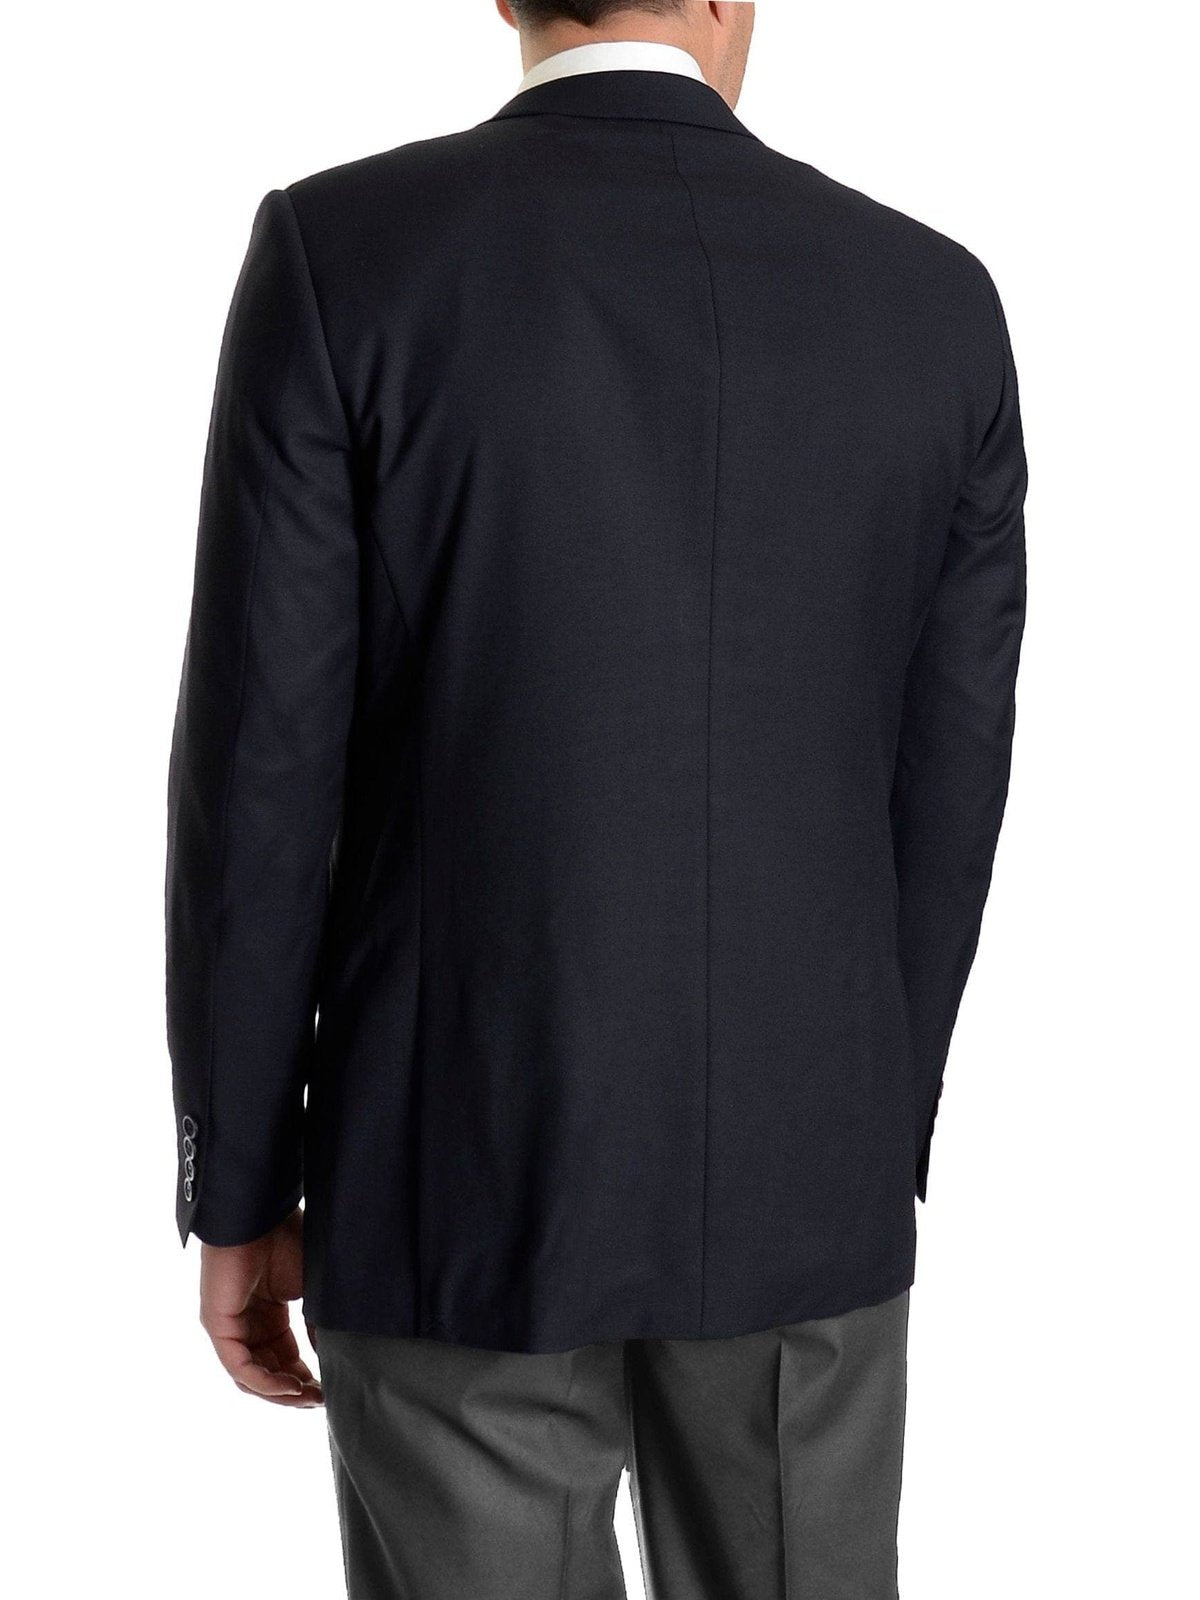 back view of navy blue two button men's blazer